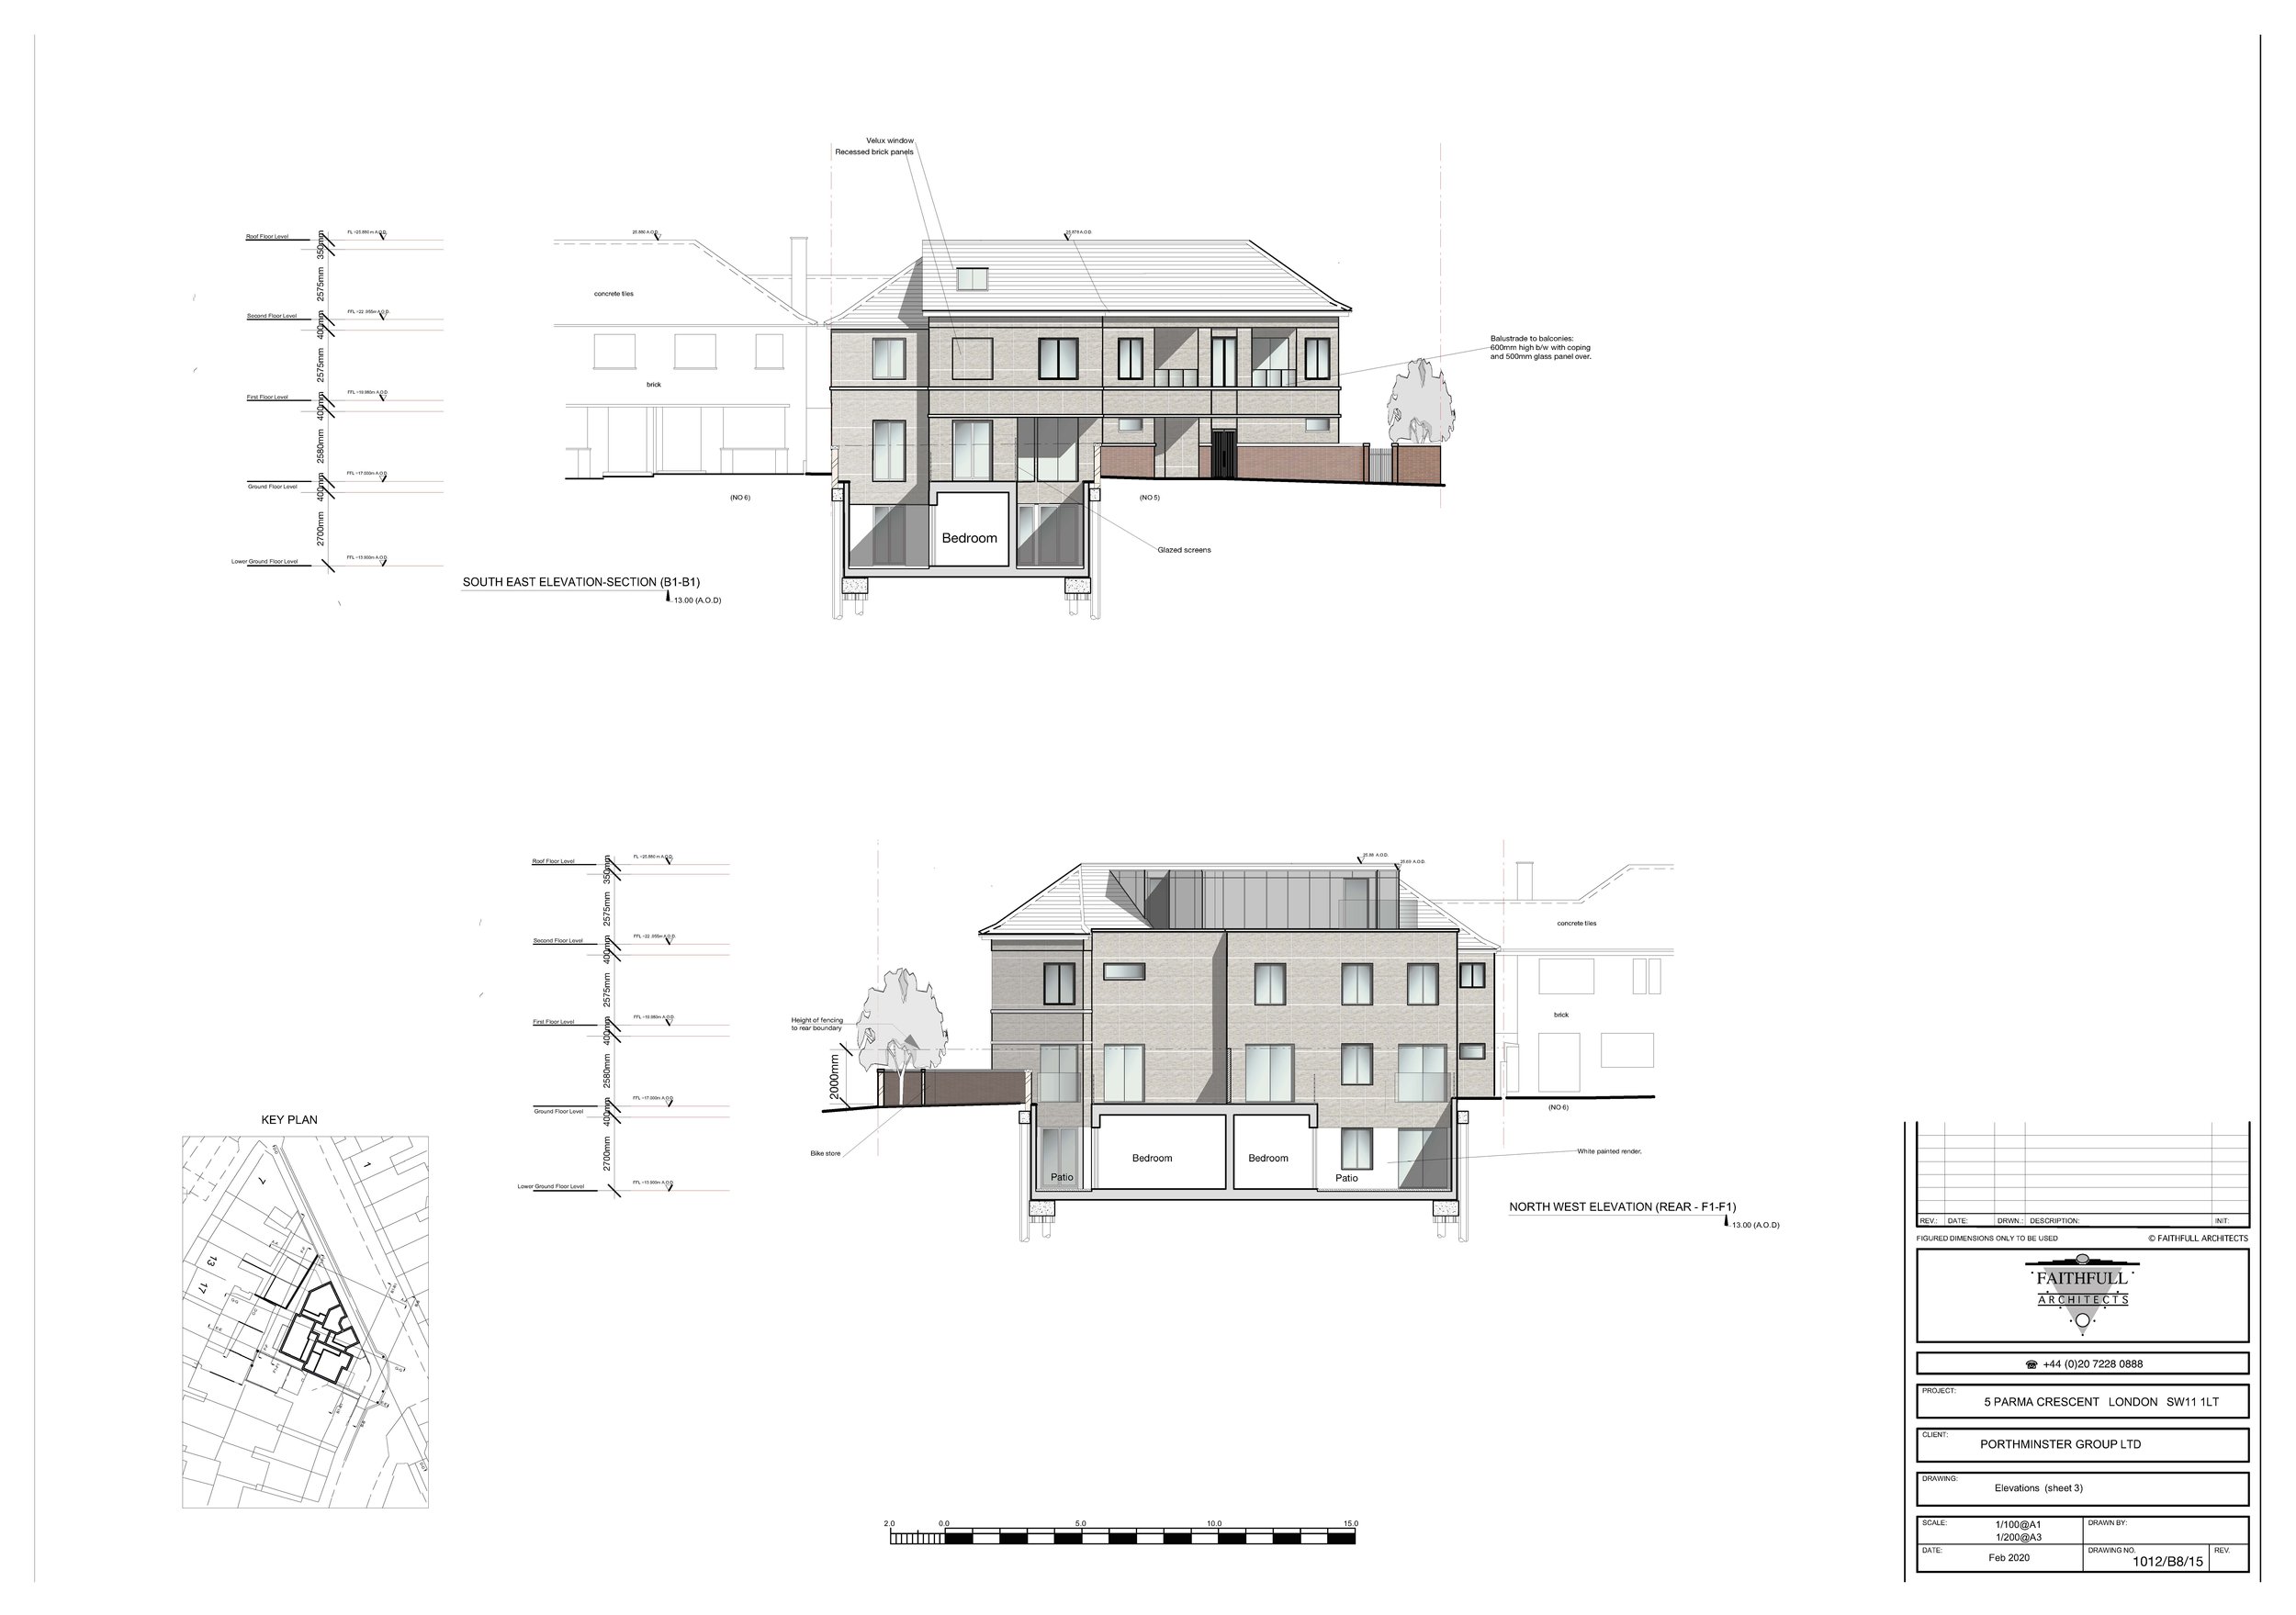 Proposed Plans Elevations Sections 7 flats_Page_8.jpg